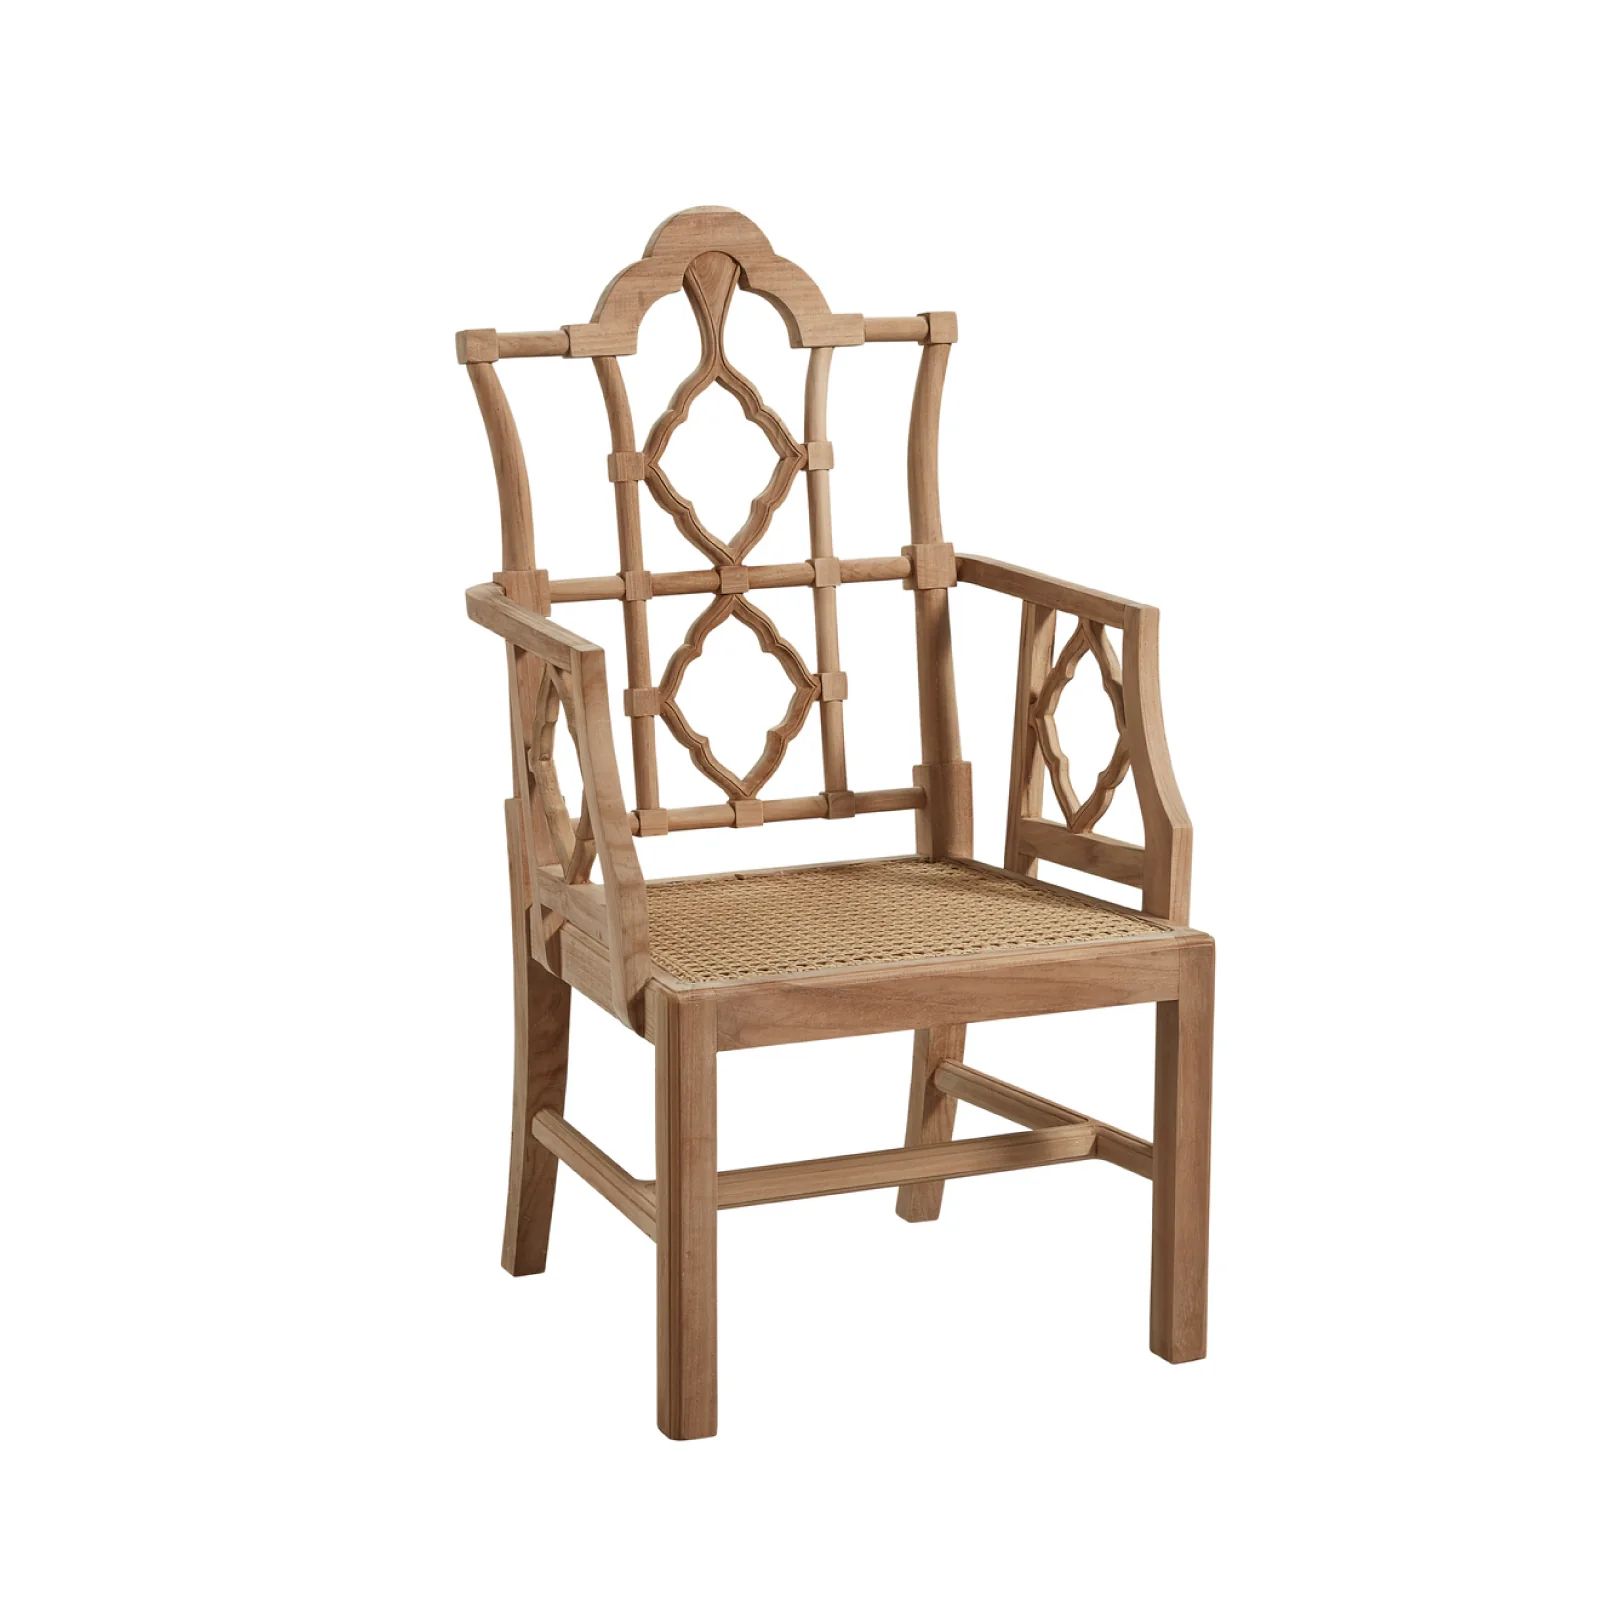 Pair of Fretwork Outdoor Chairs | Brooke and Lou